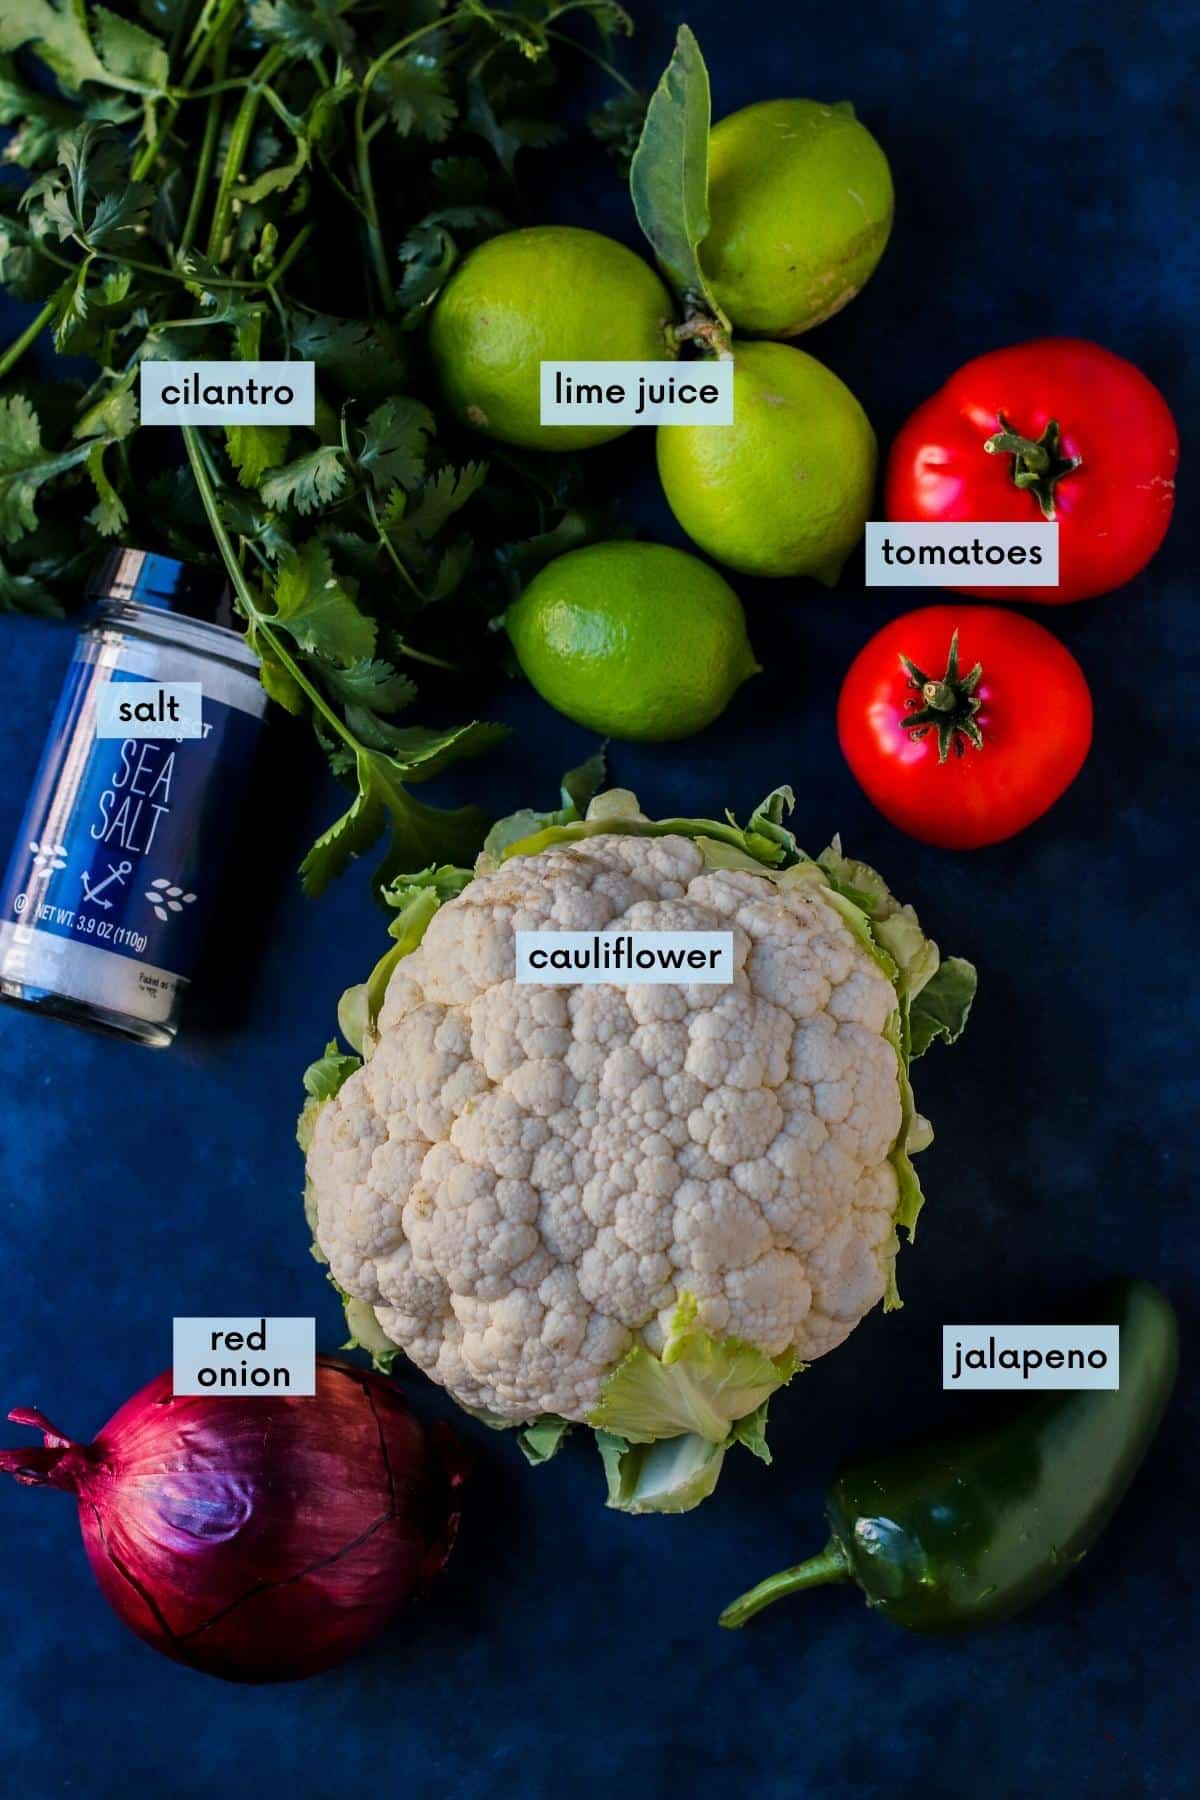 Labeled ingredients needed to make this recipe.